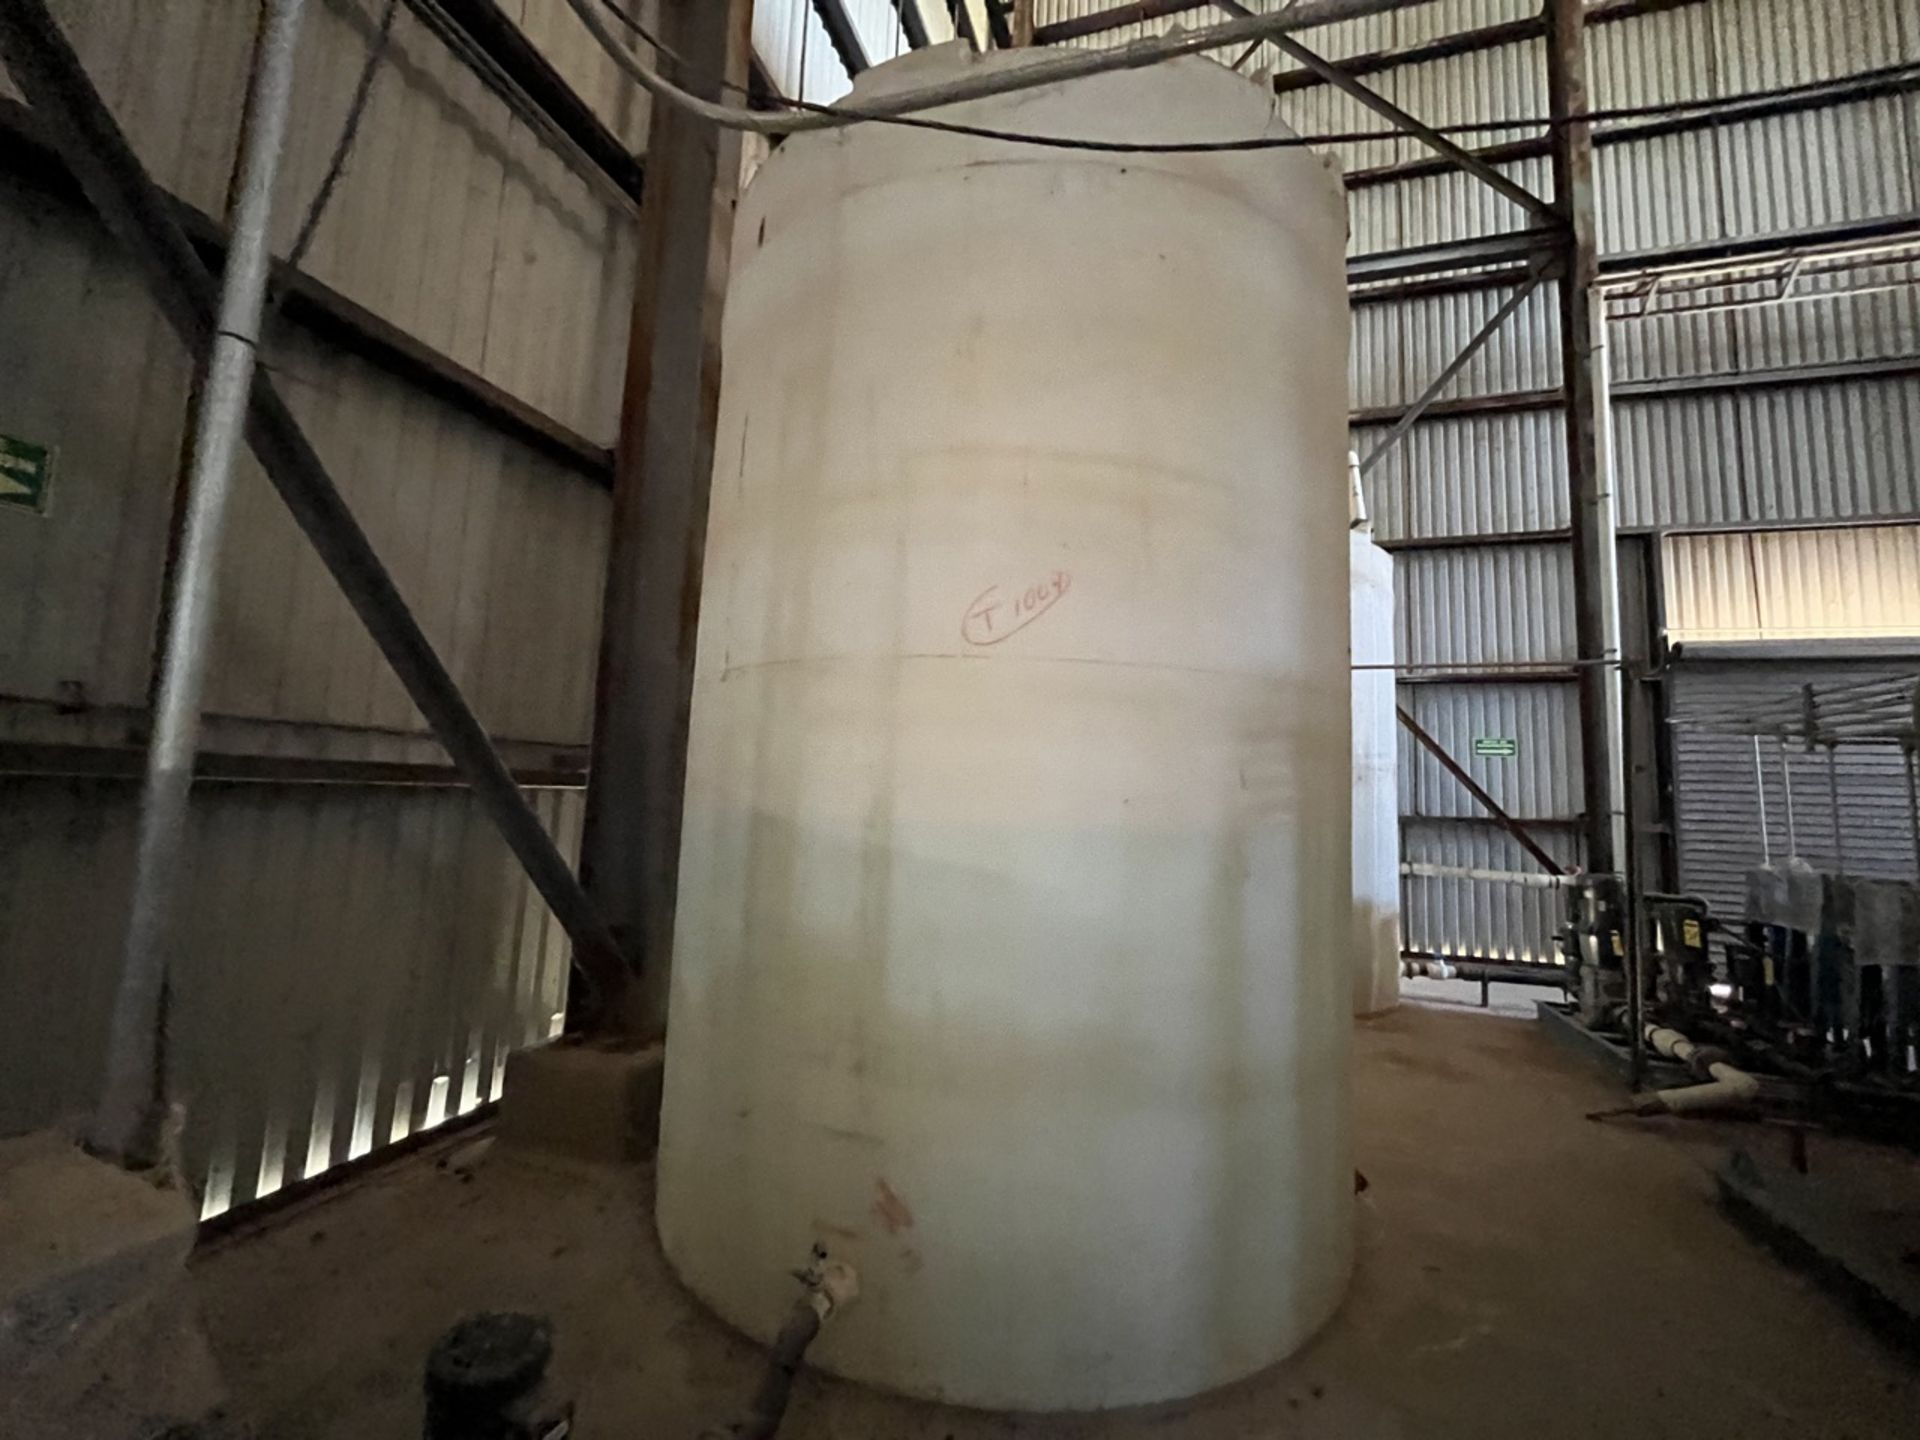 Plastic water storage tank with a capacity of 12,000 liters measuring approx 2.40 meters diameter x - Image 5 of 16